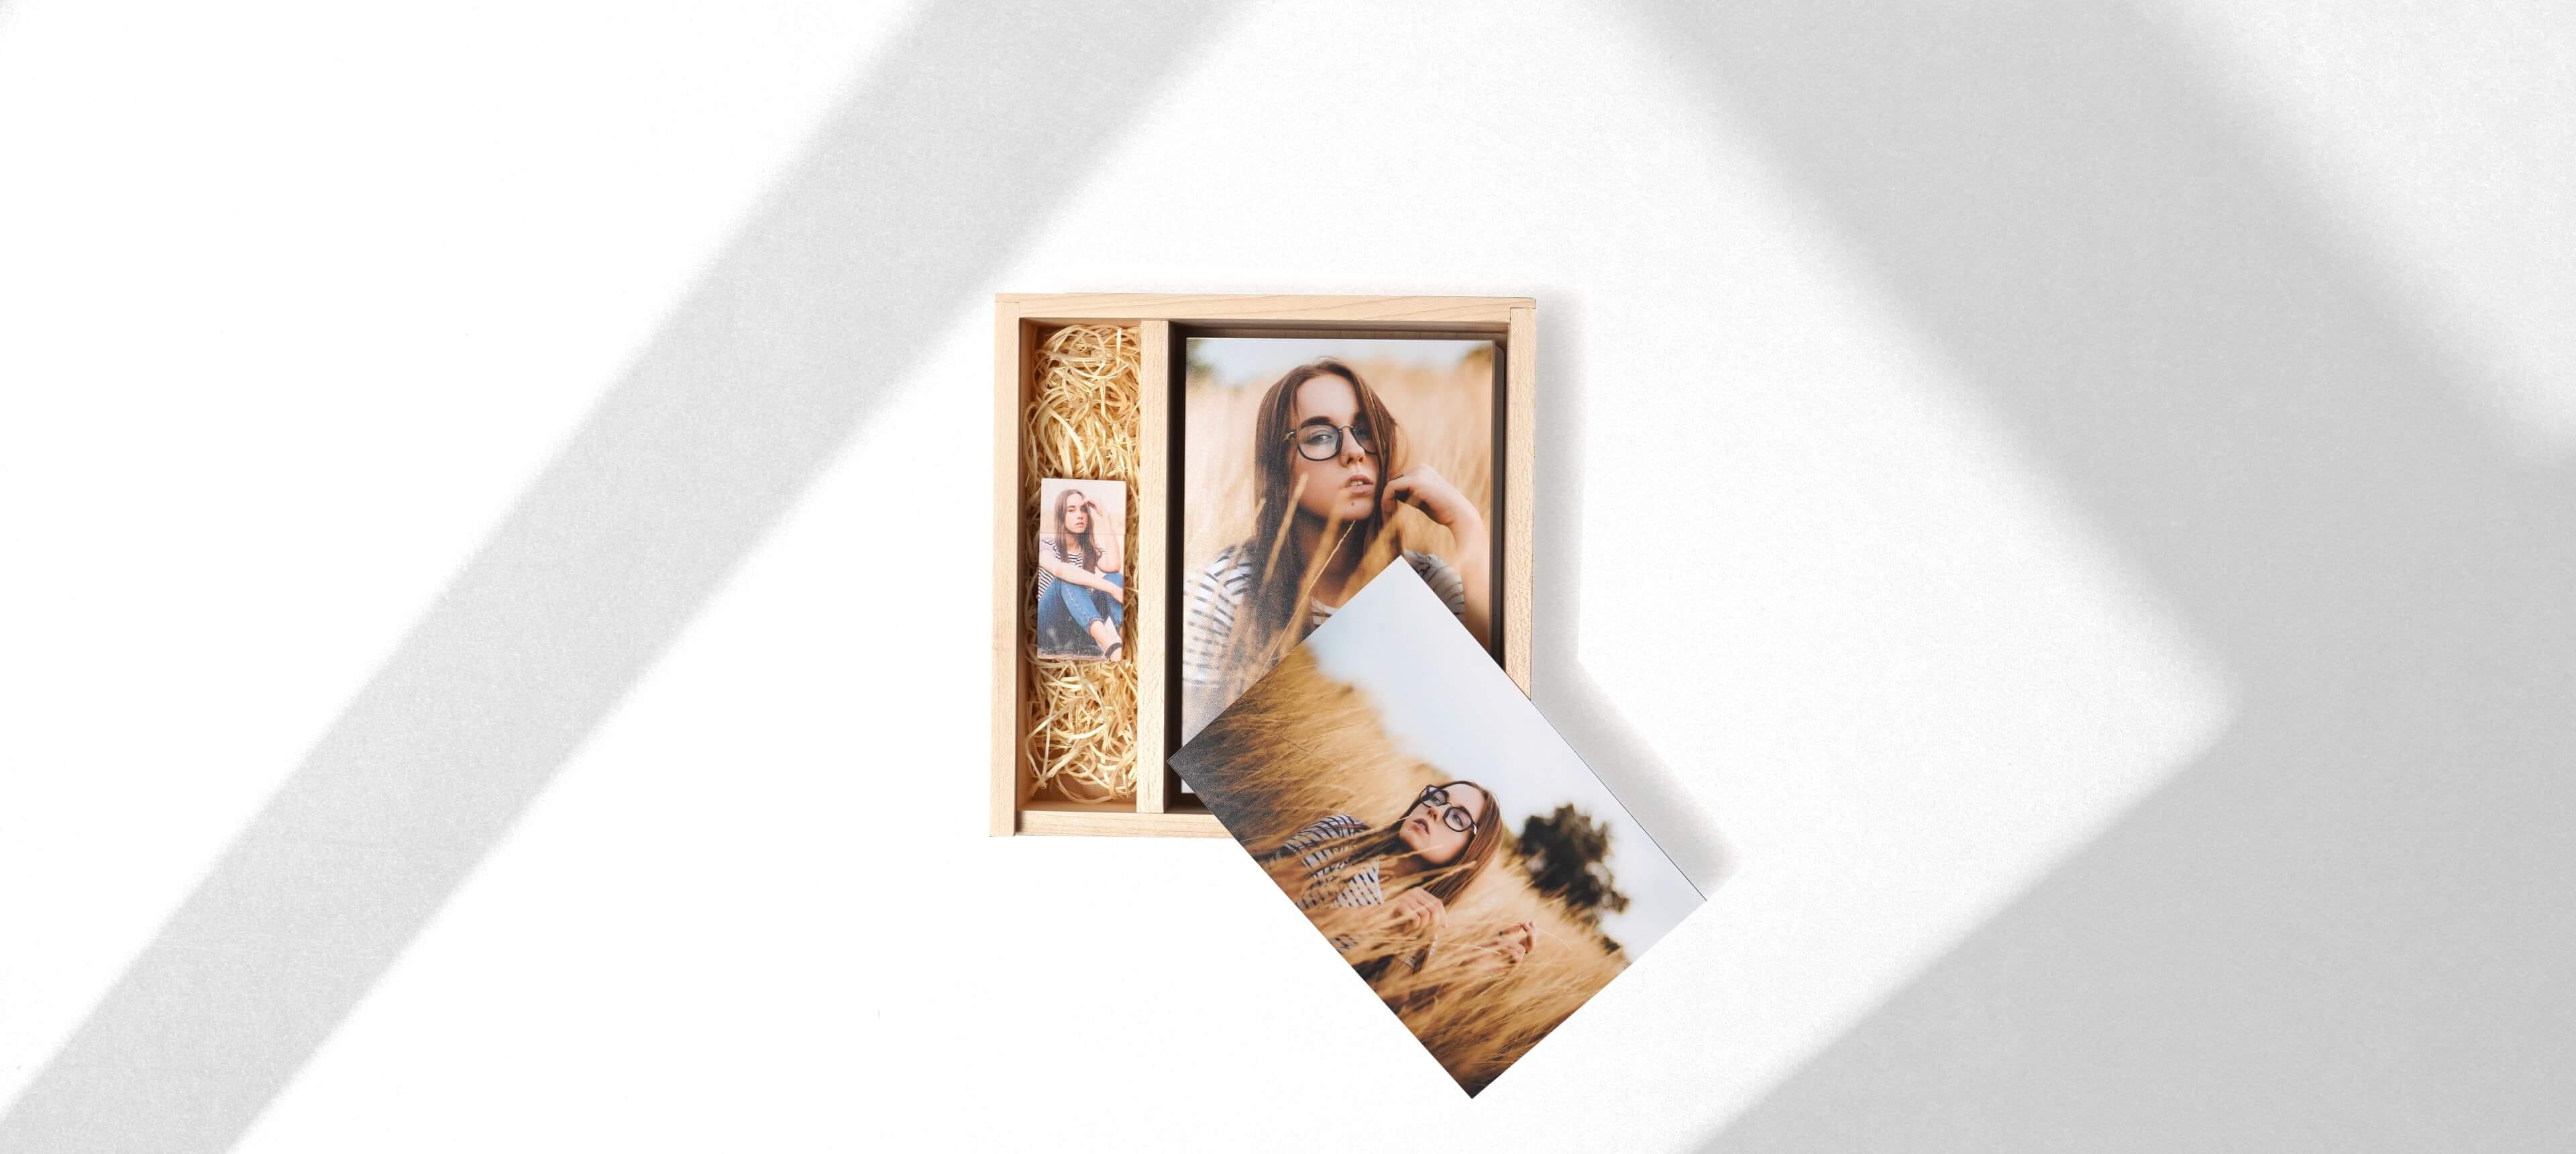 a wood box set showing a wood usb and prints of a girl inside a box